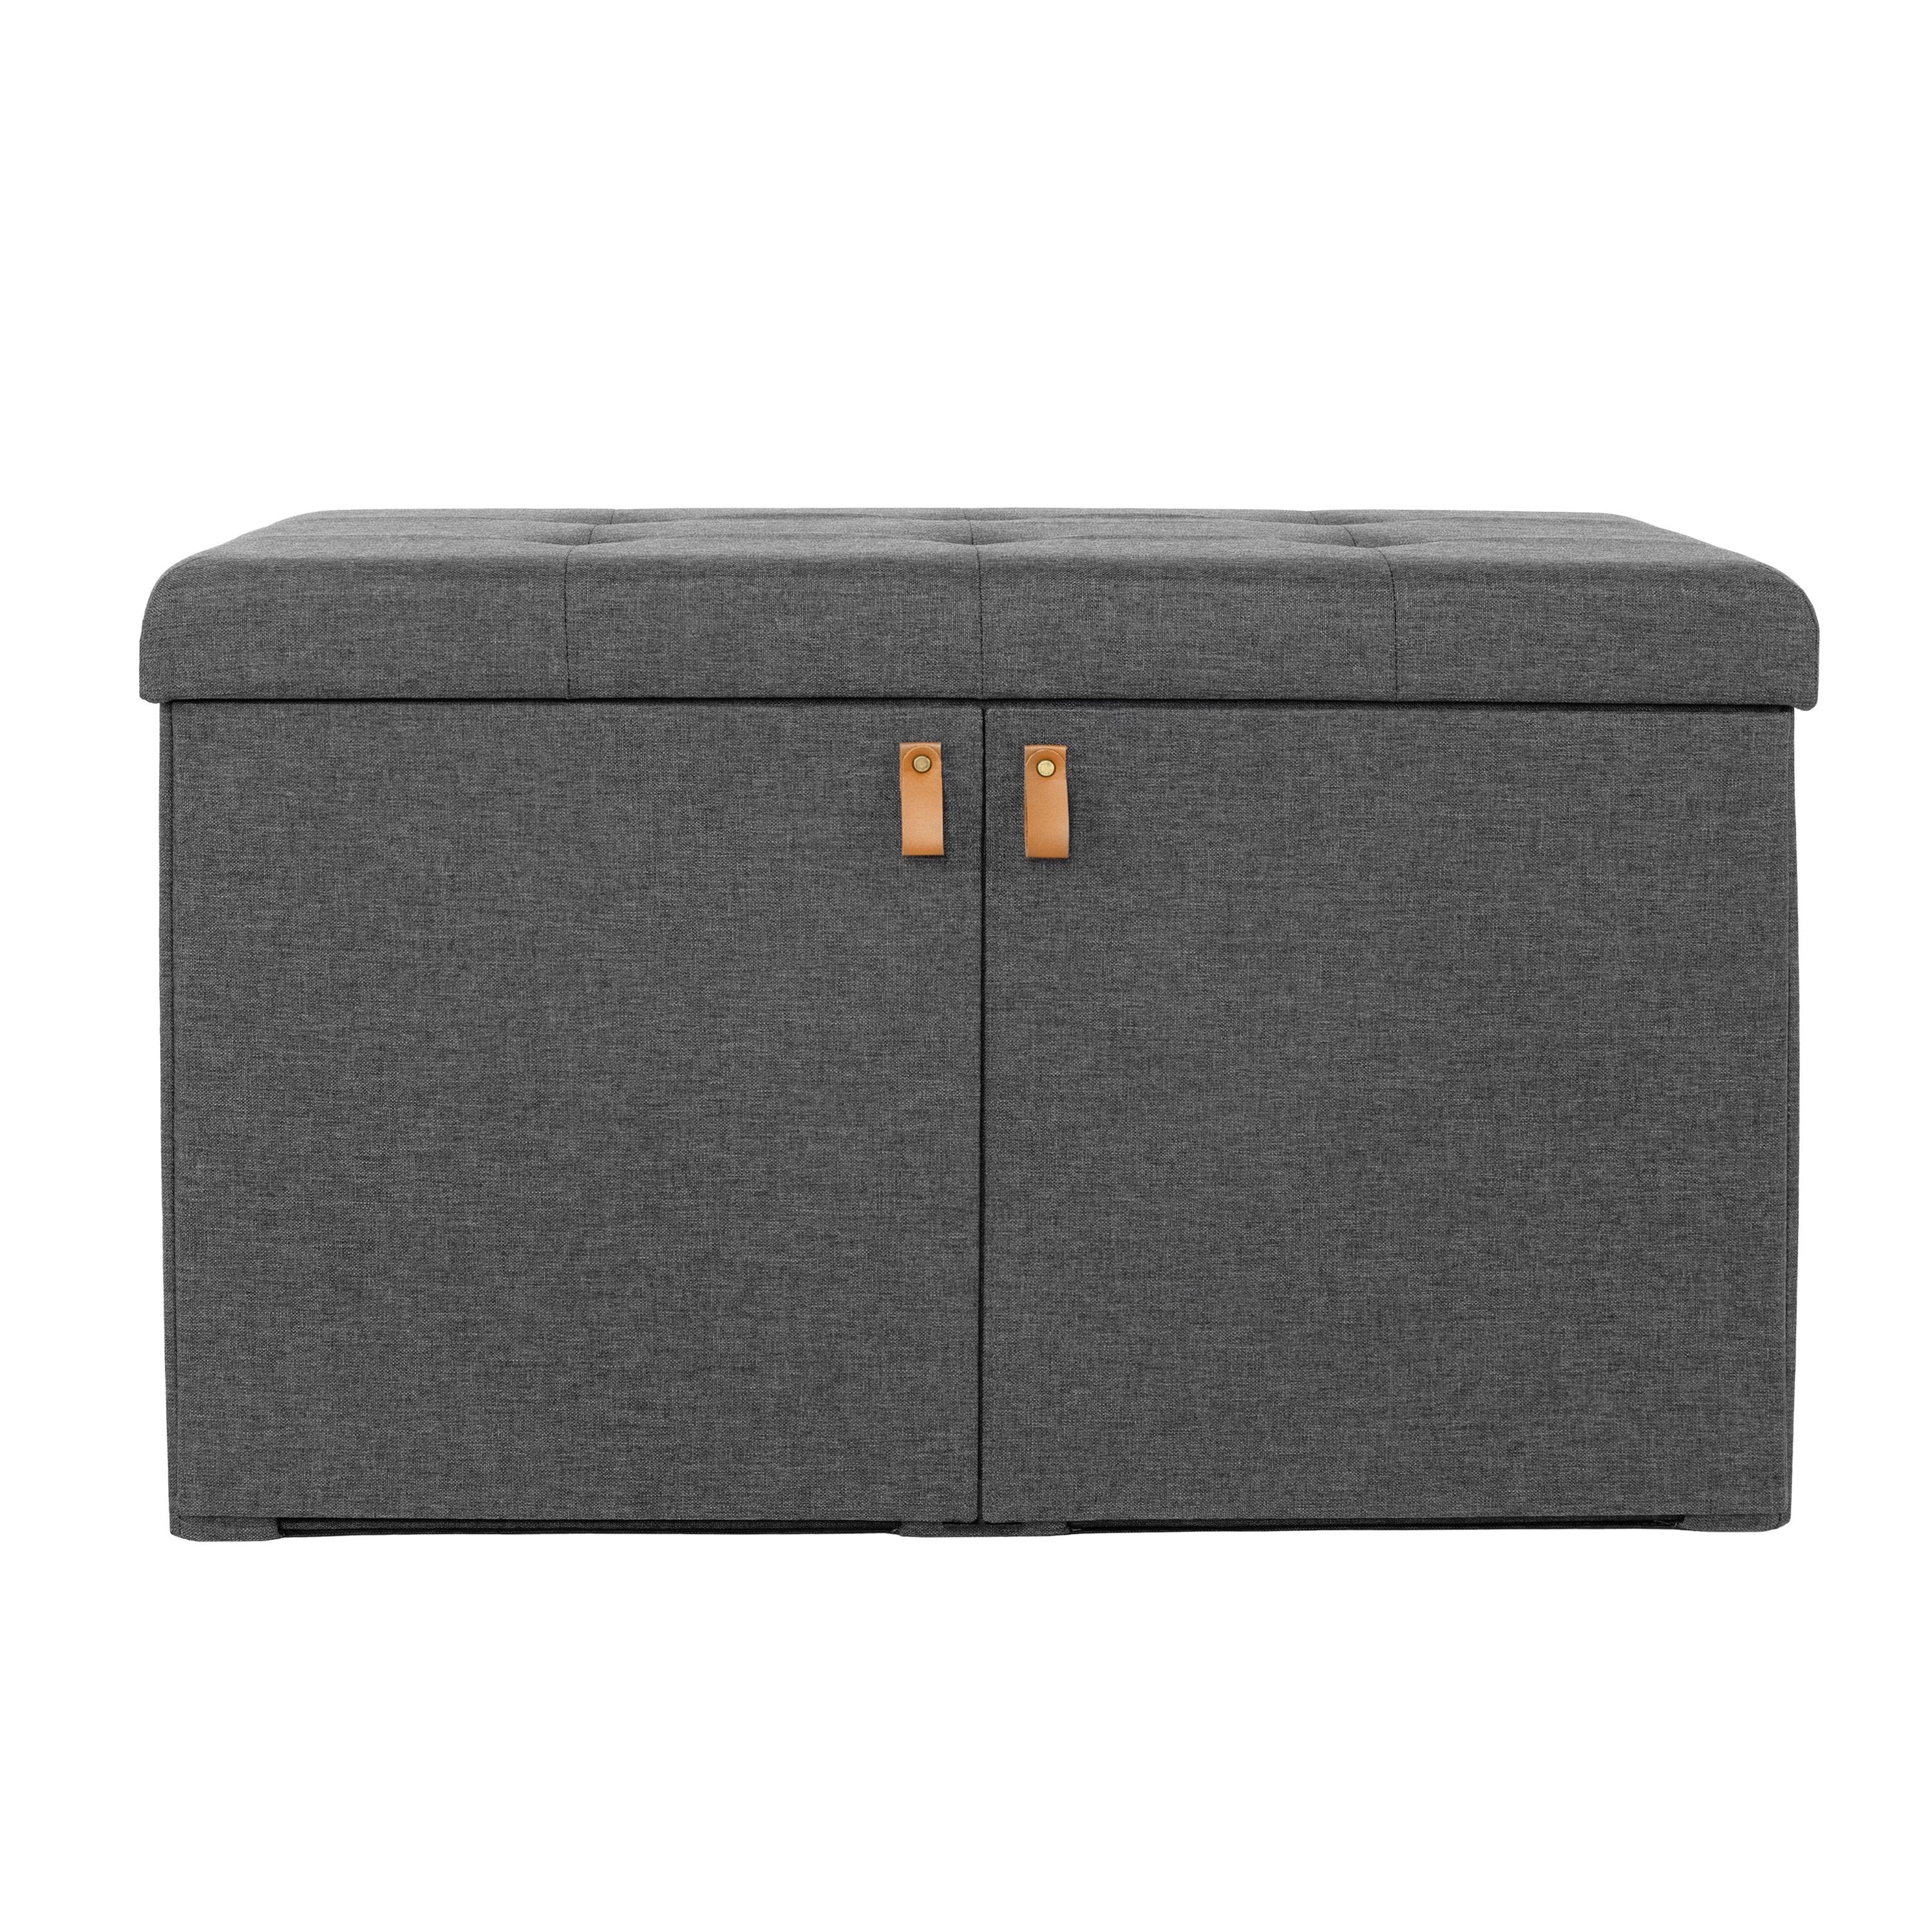 Modern Gray Tufted Ottoman Storage Bench with Adjustable Shoe Shelves